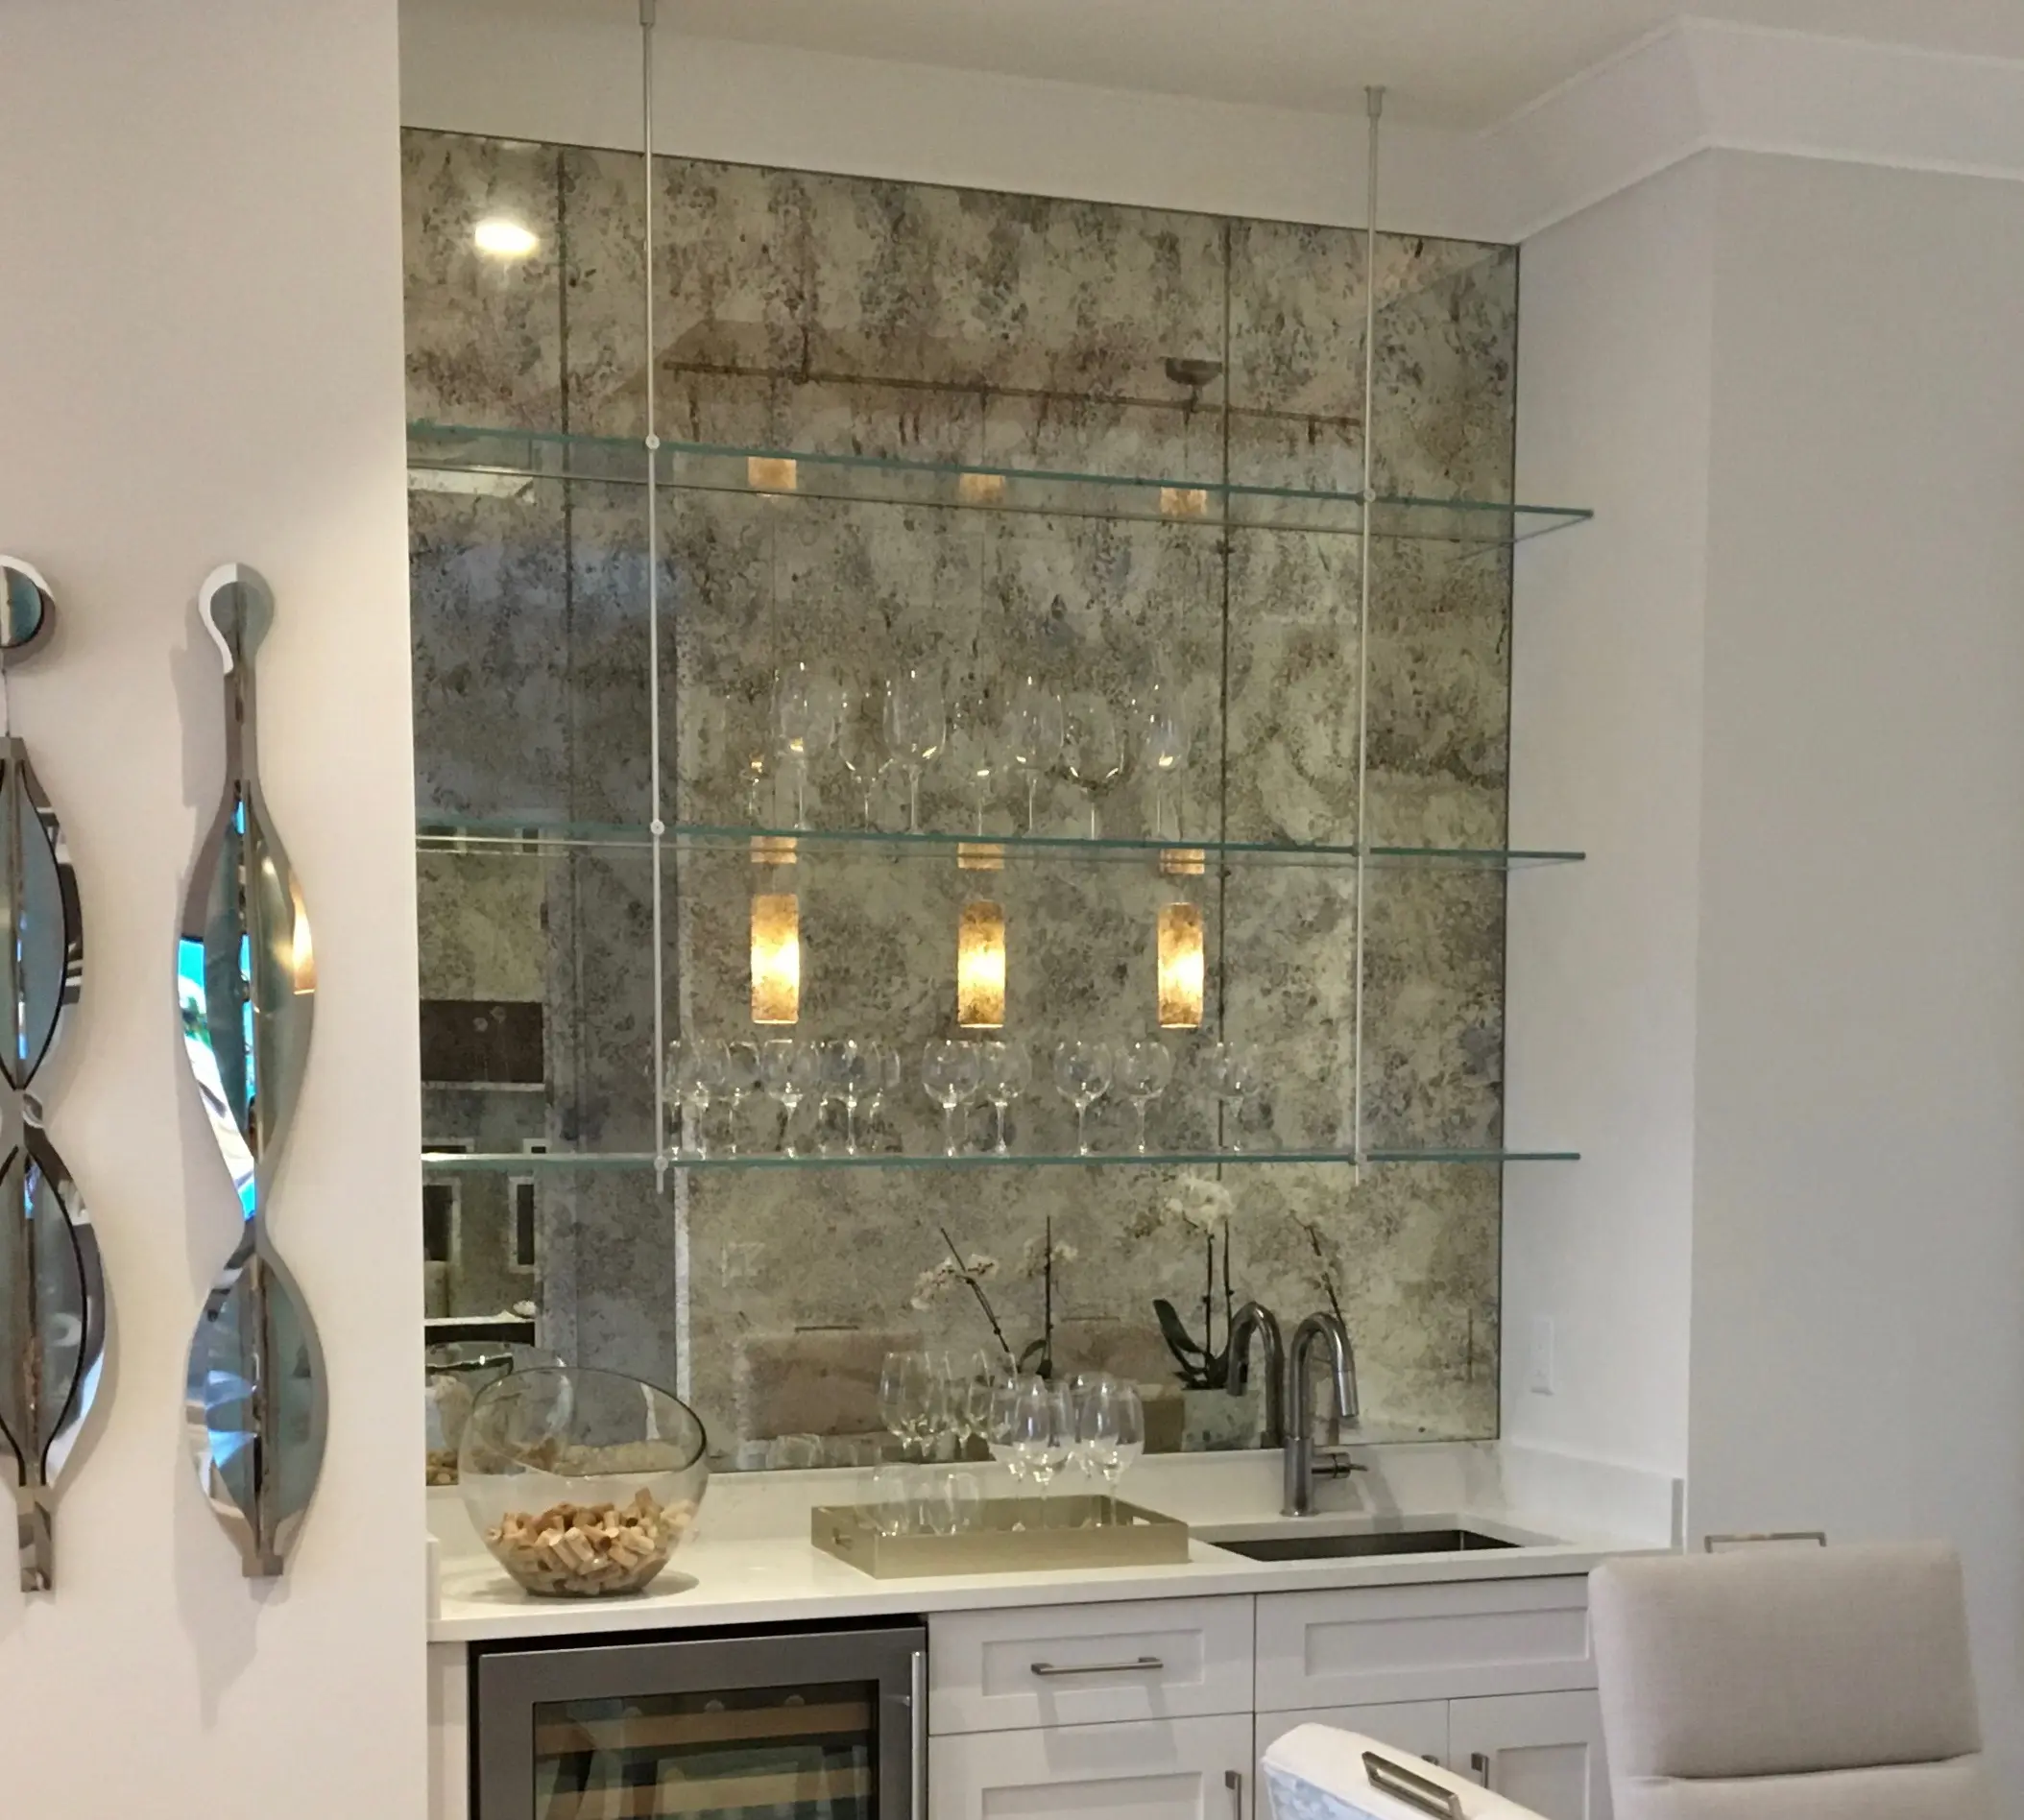 smoked glass tiles - What is the disadvantage of glass tiles